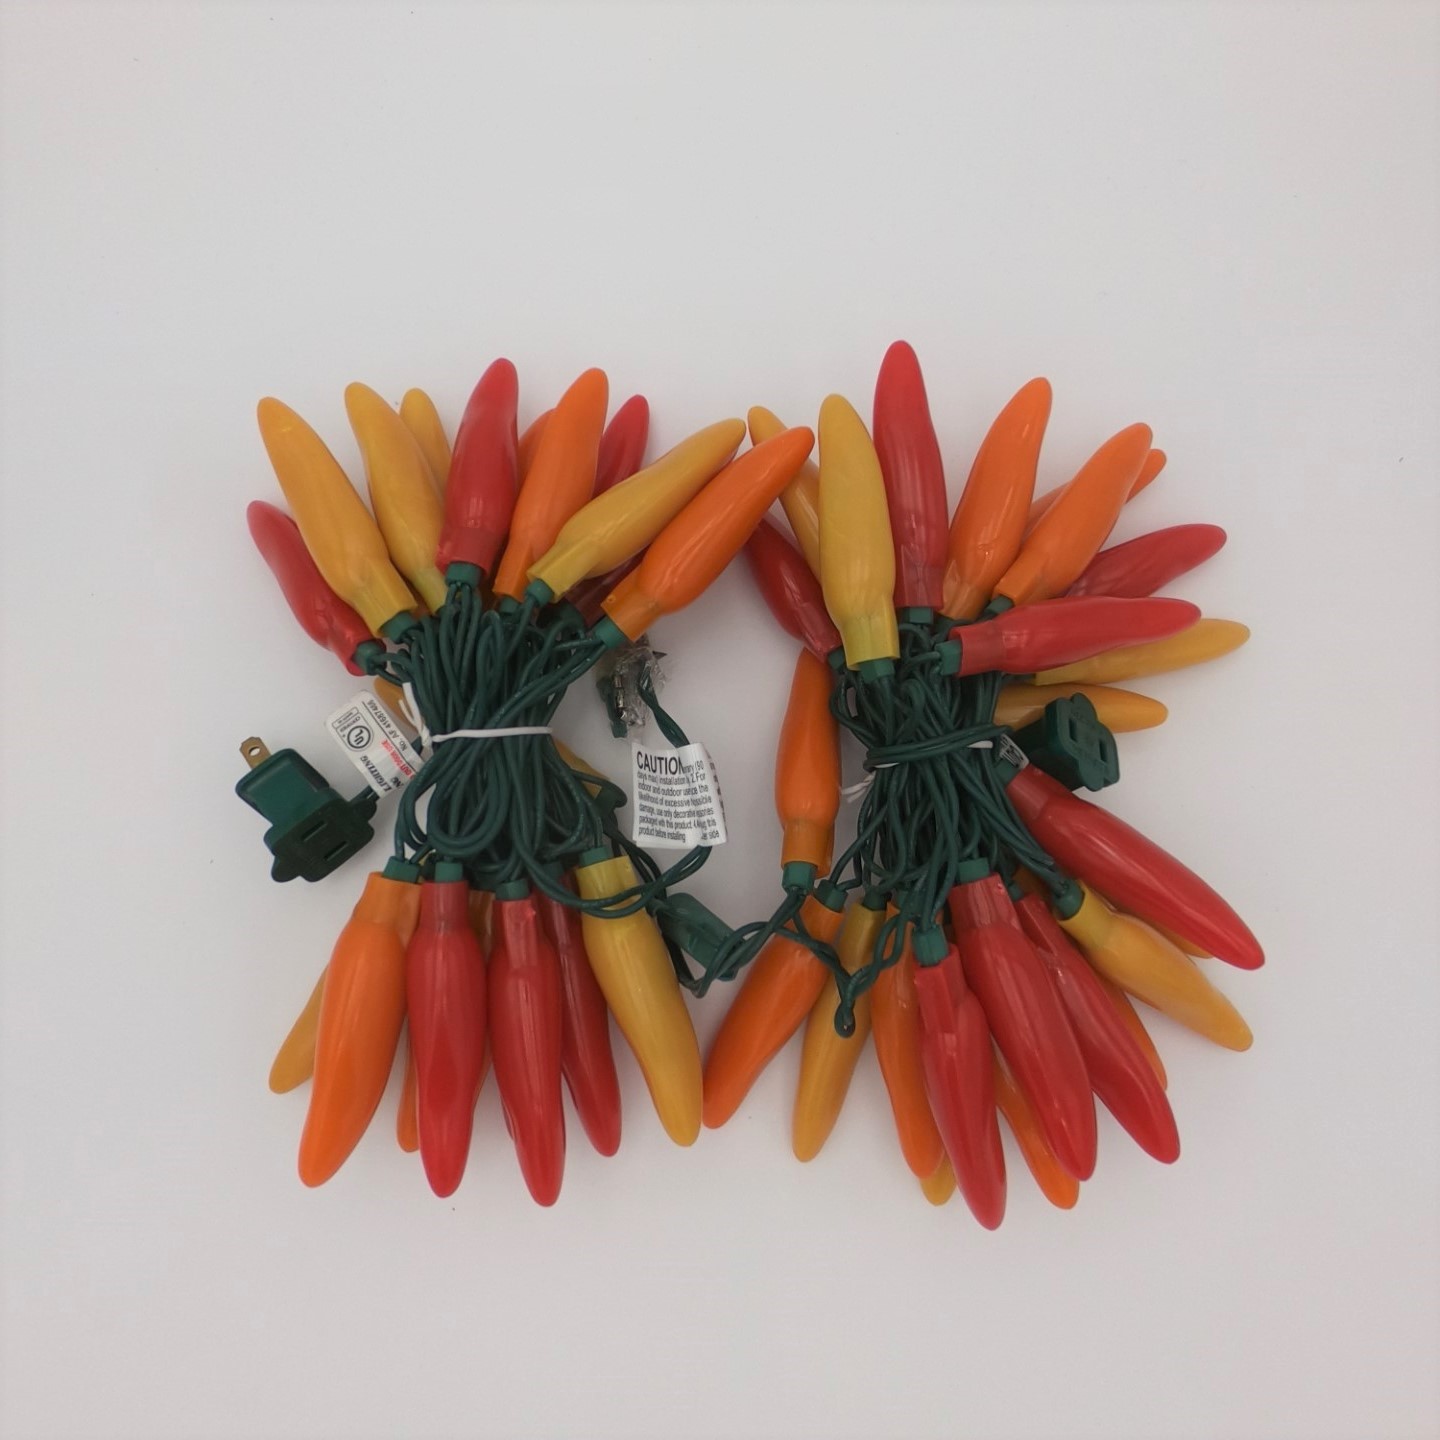 C17950 50 LED Thanksgiving Chili Pepper Lights bunched by RC Company LLC